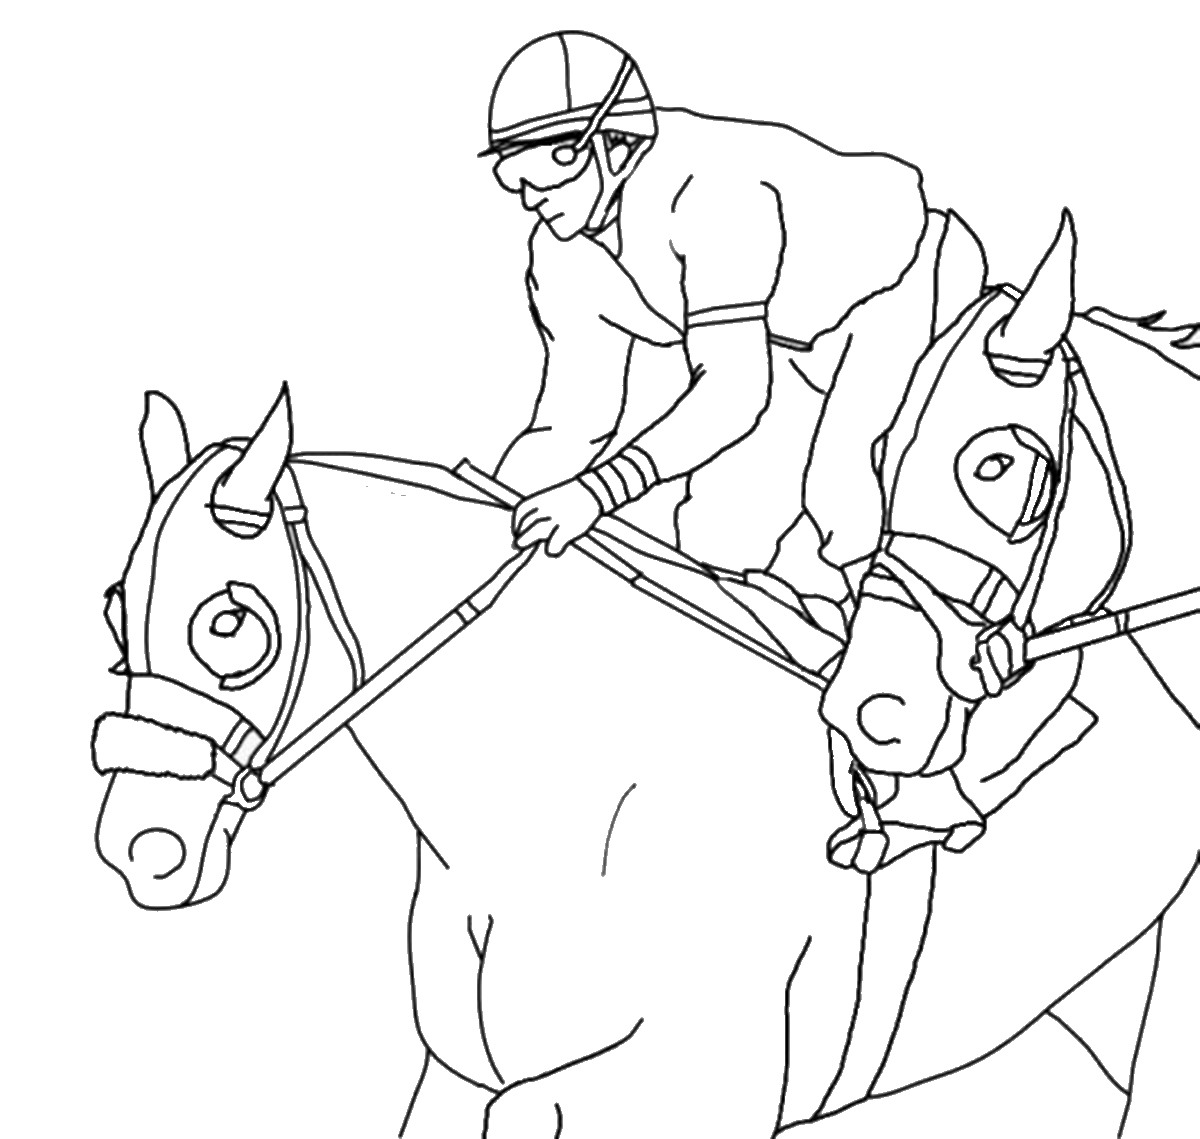 Horse coloring pages â birthday printable